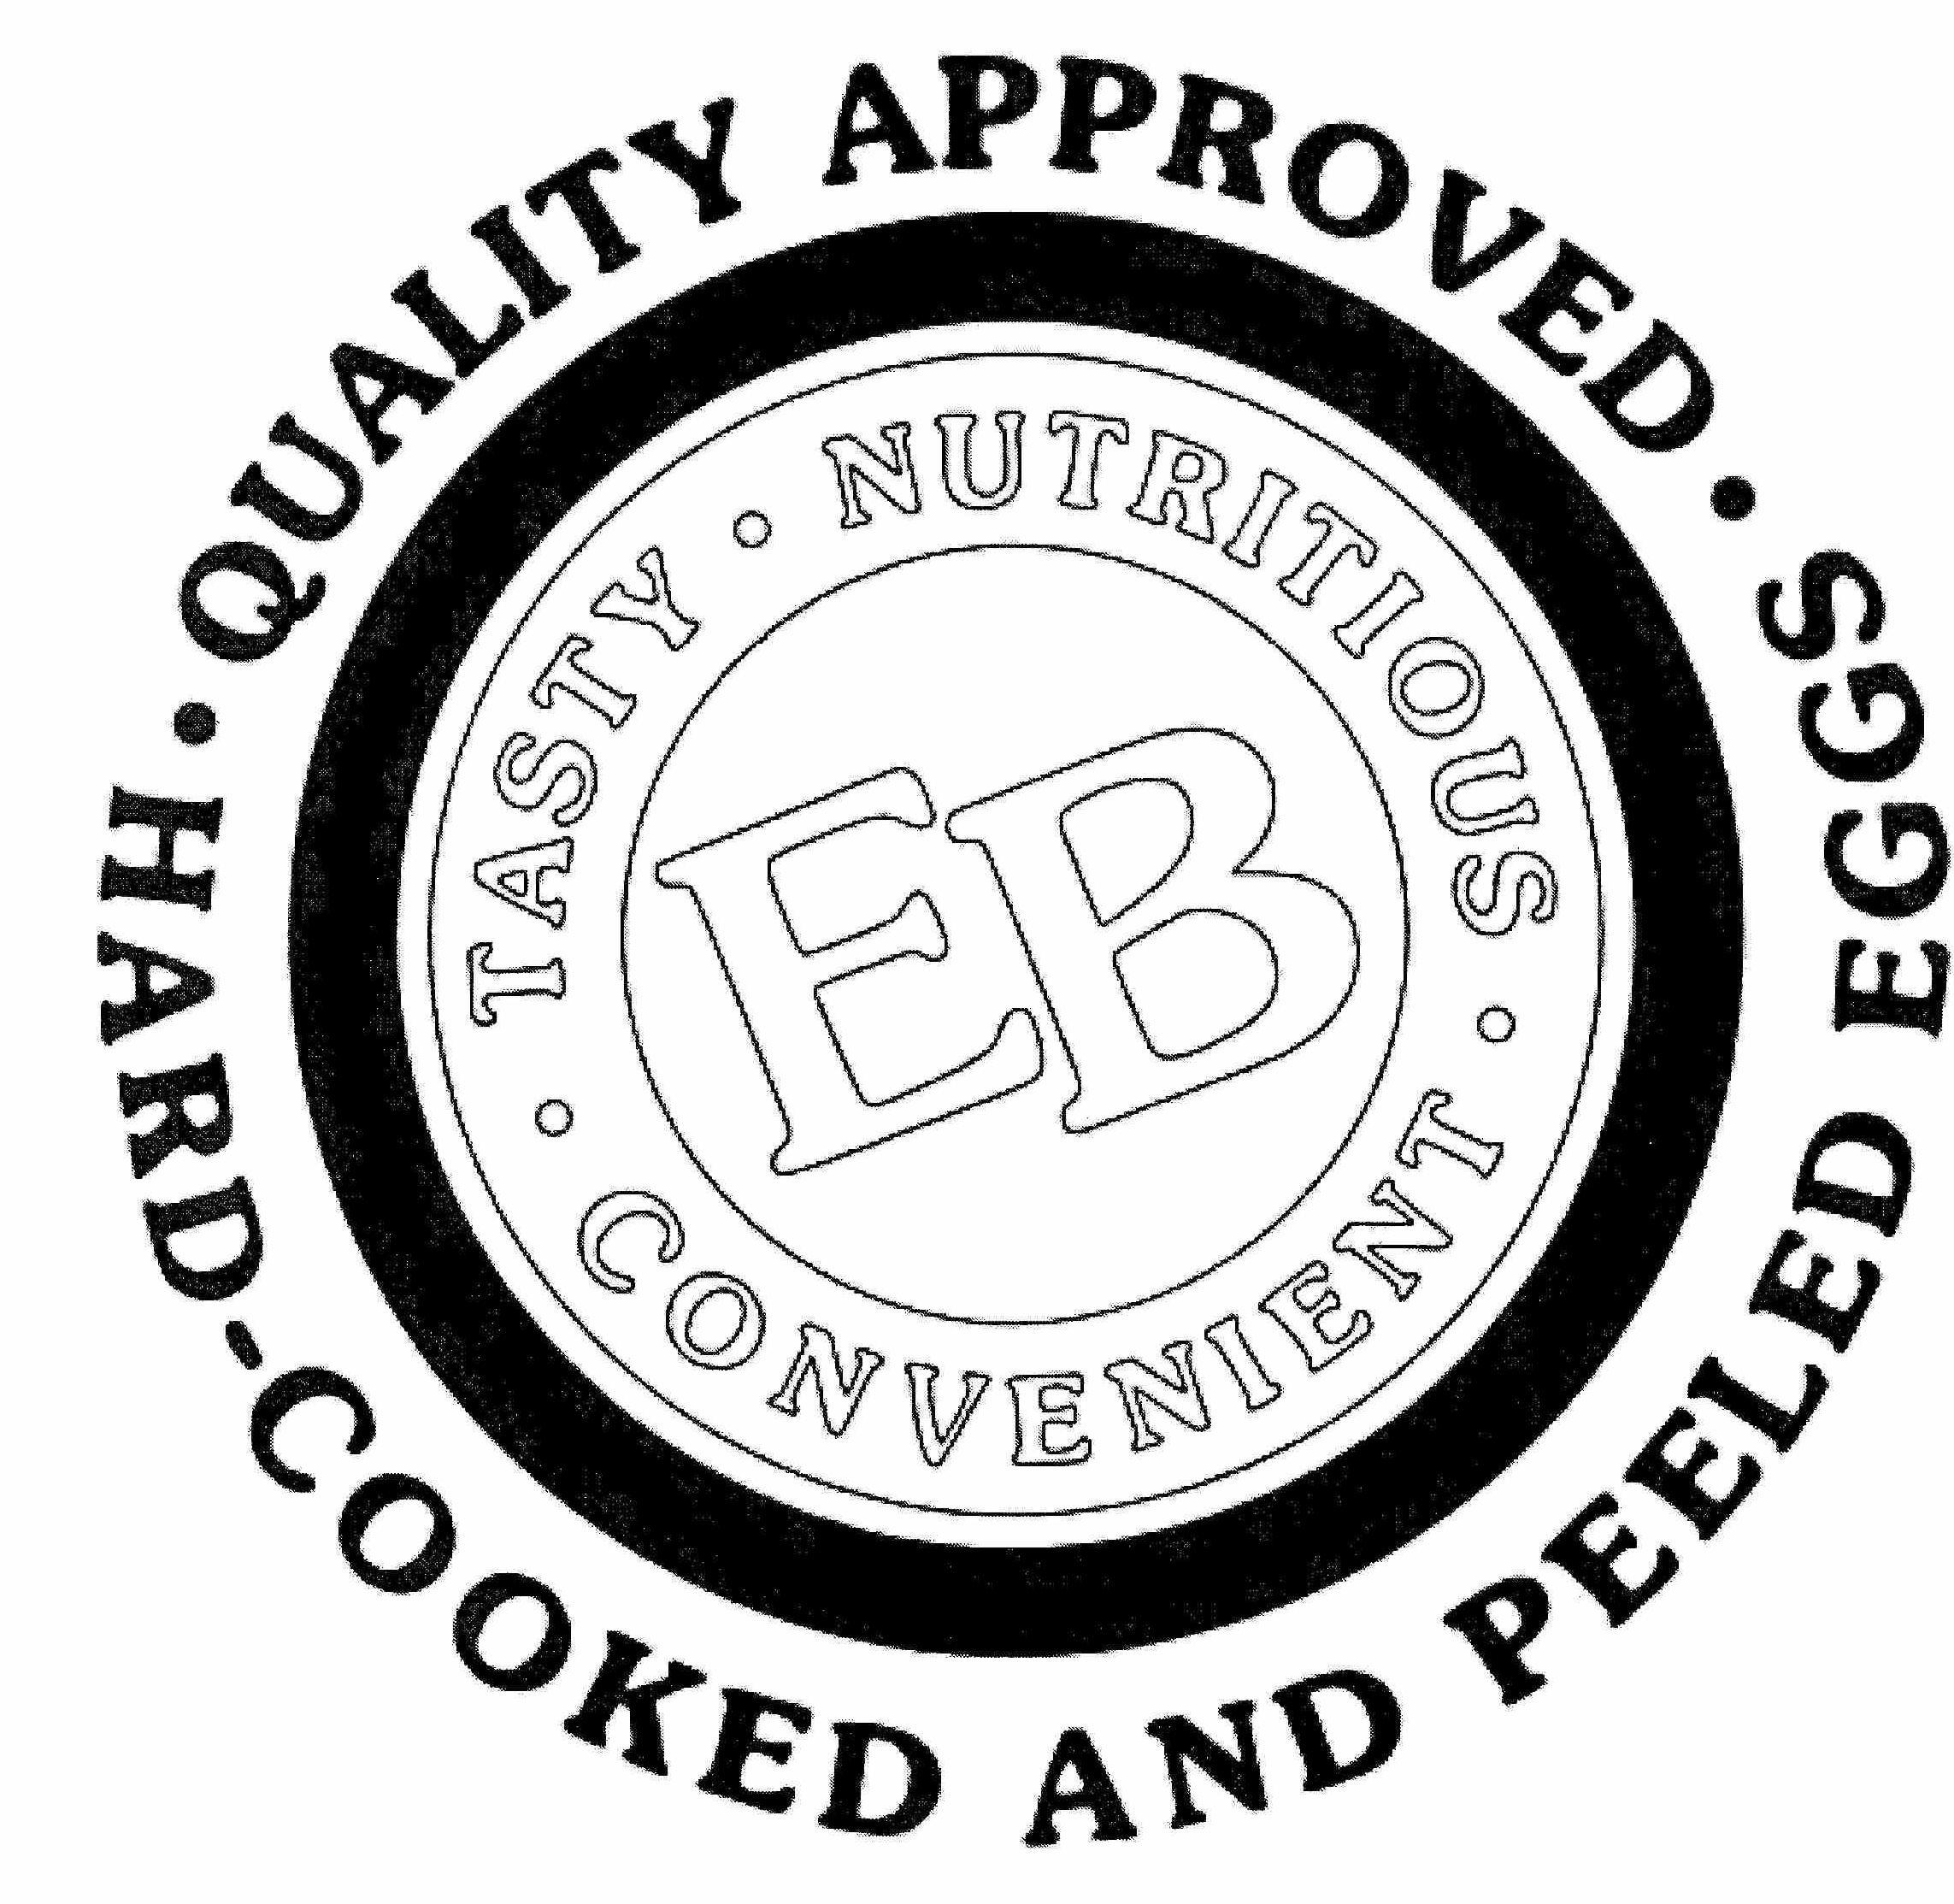  QUALITY APPROVED HARD COOKED AND PEELED EGGS TASTY NUTRITIOUS CONVENIENT EB